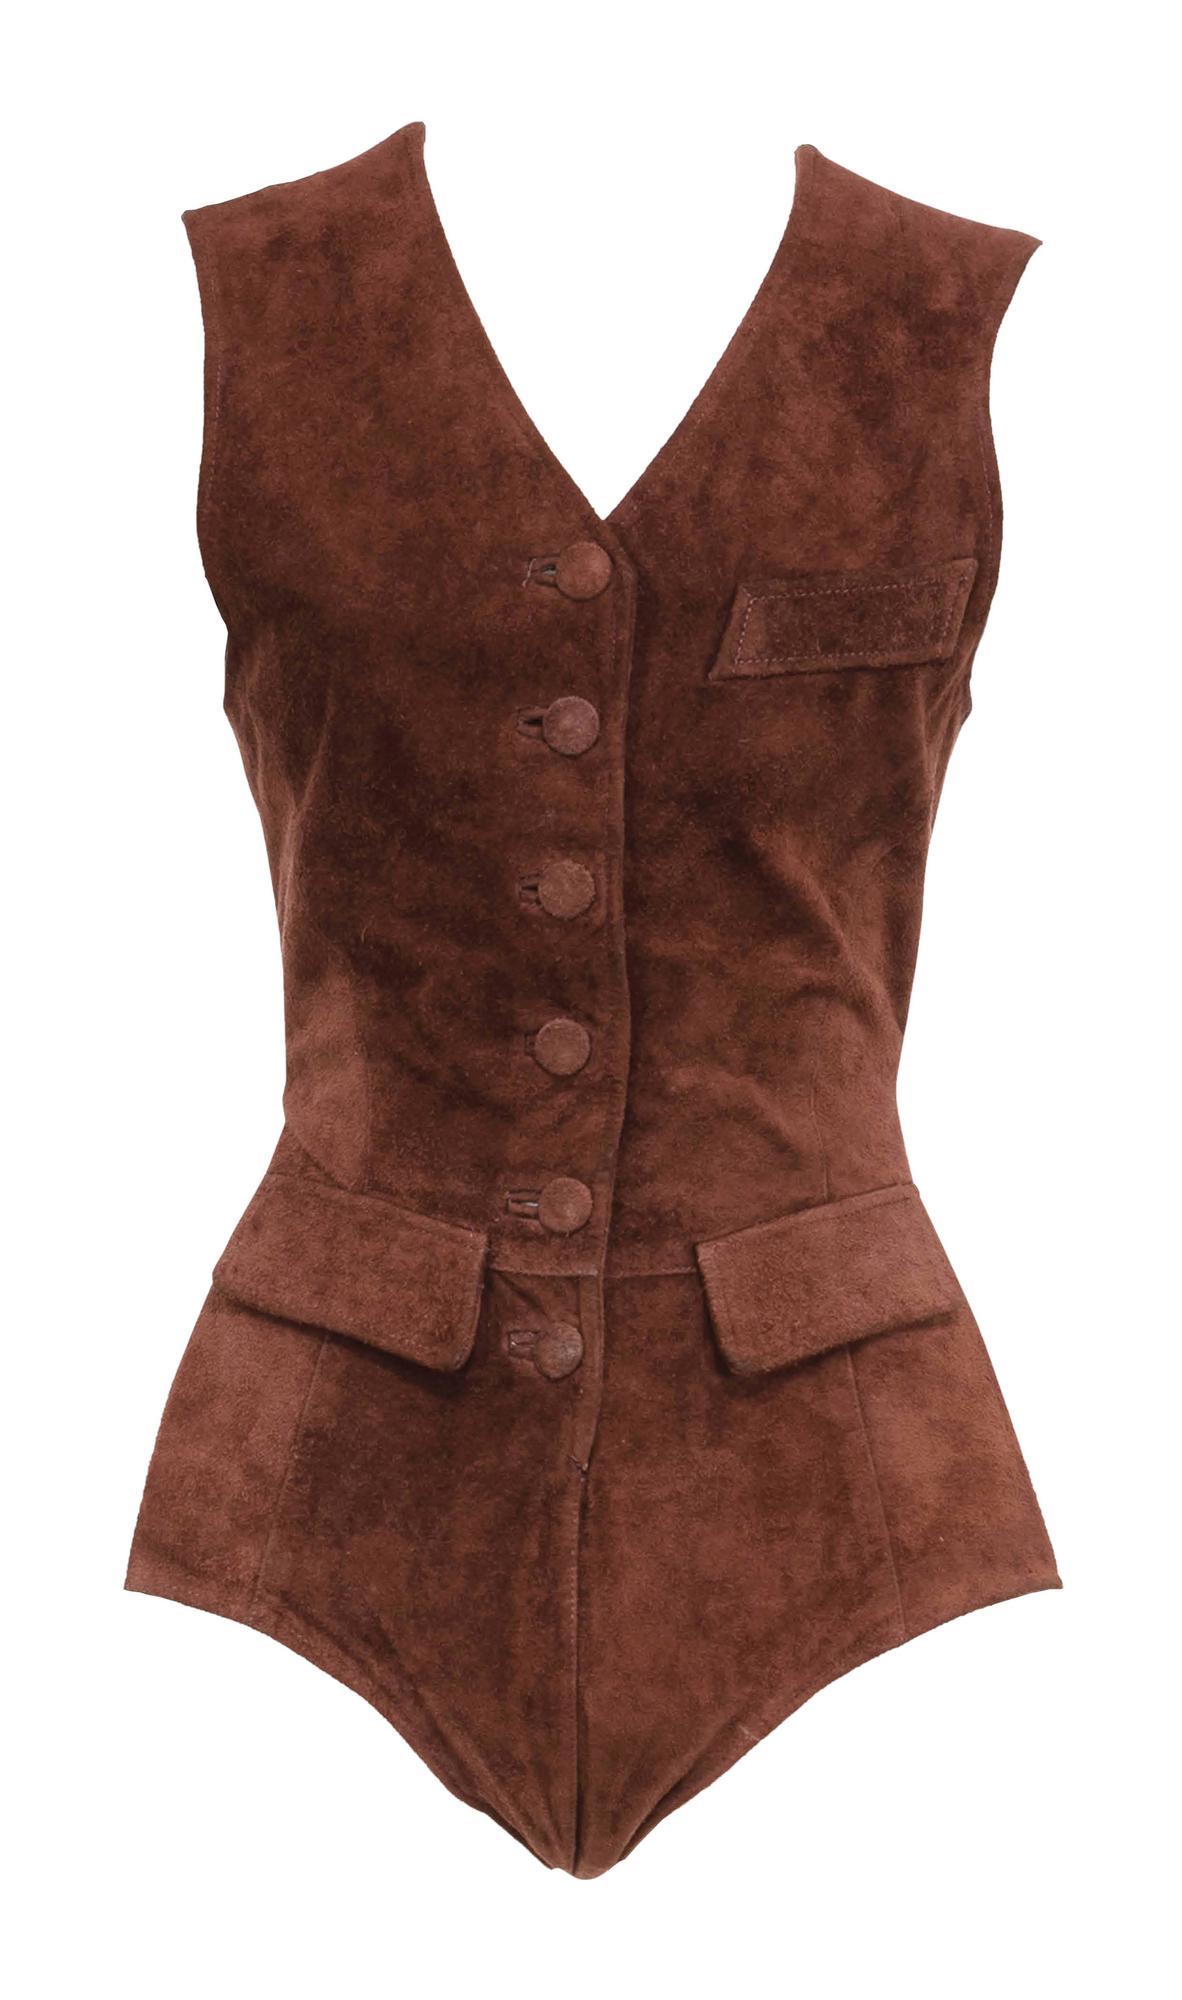 Jean Paul Gaultier RARE AND ICONIC SUEDE BODY DESCRIPTION: Rare ance iconic...